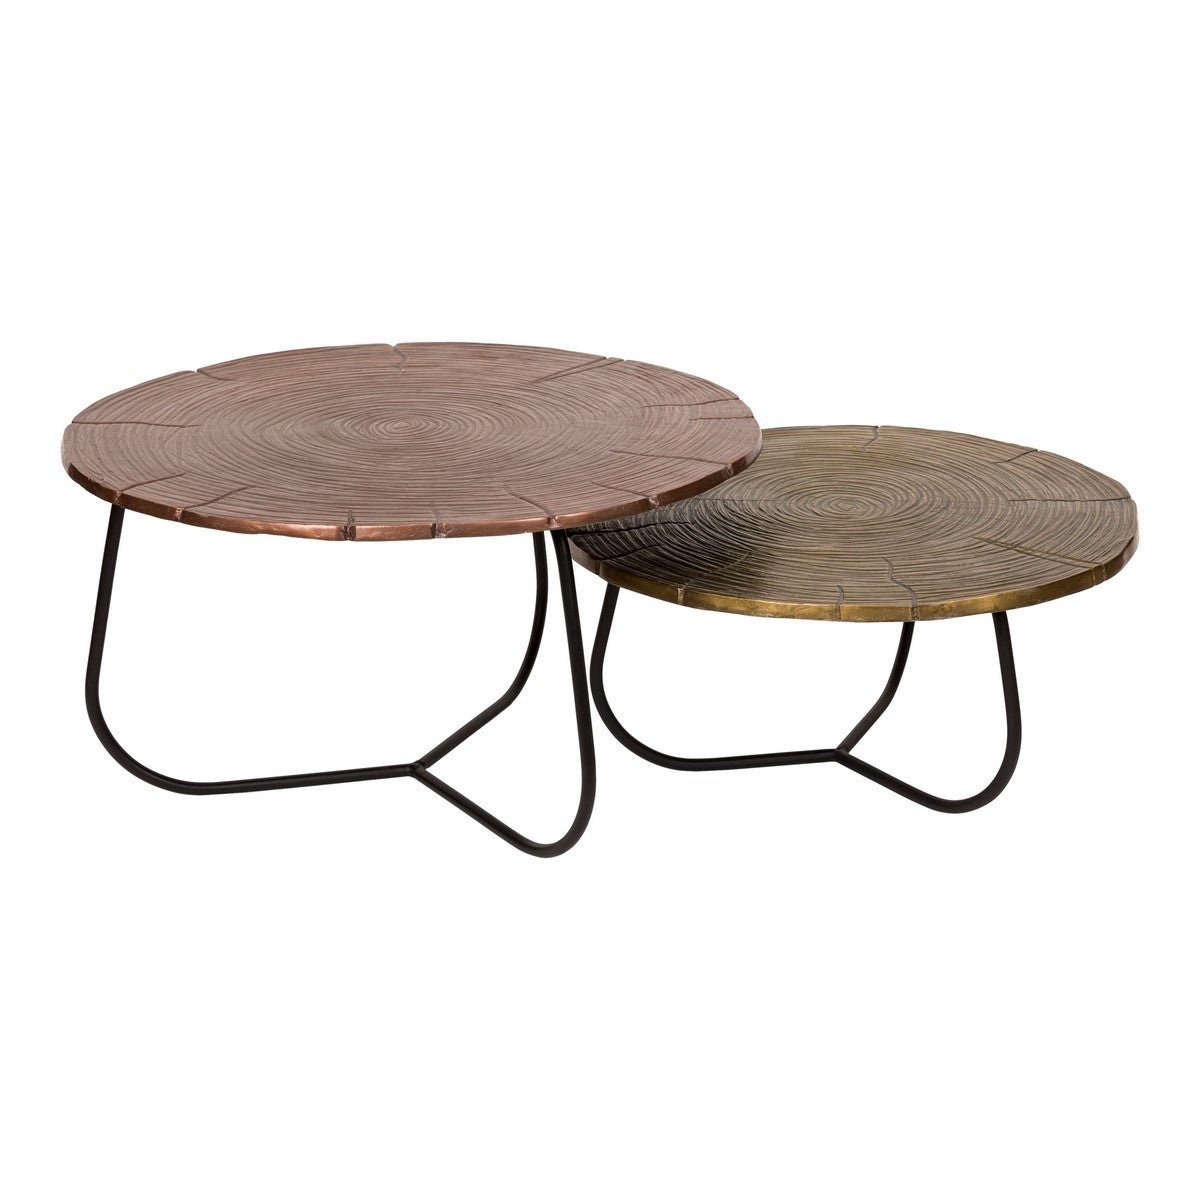 Moe's Home Collection Cross Section Tables Set of Two - ZY-1010-37 - Moe's Home Collection - Coffee Tables - Minimal And Modern - 1